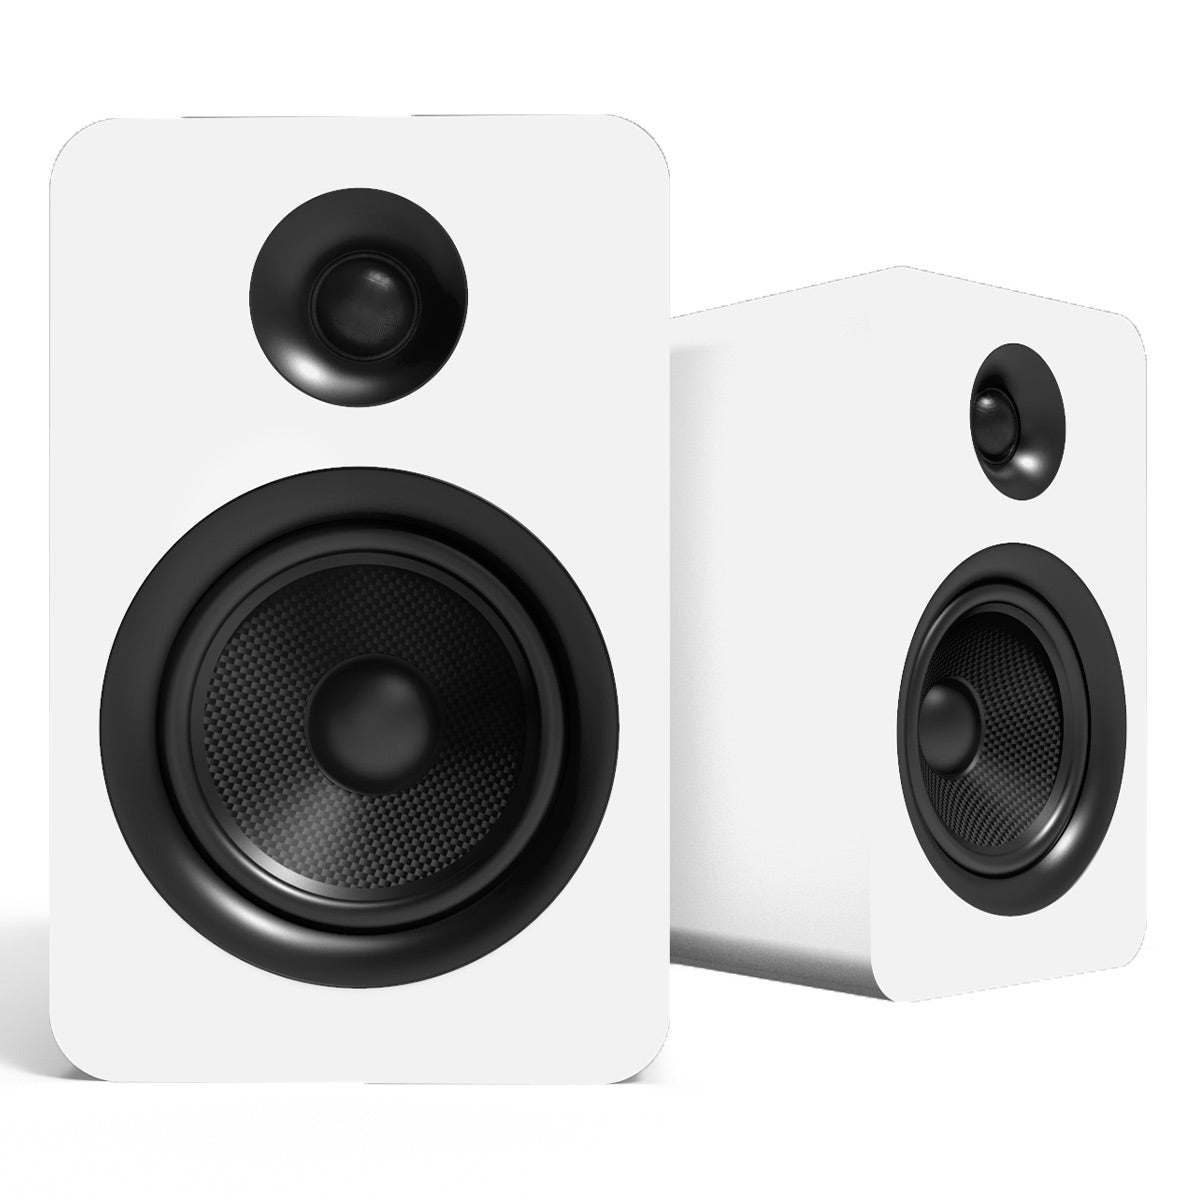 Kanto YUP6 Passive Bookshelf Speakers with 1" Silk Dome Tweeter and 5.25" Kevlar Woofer - Pair (White)